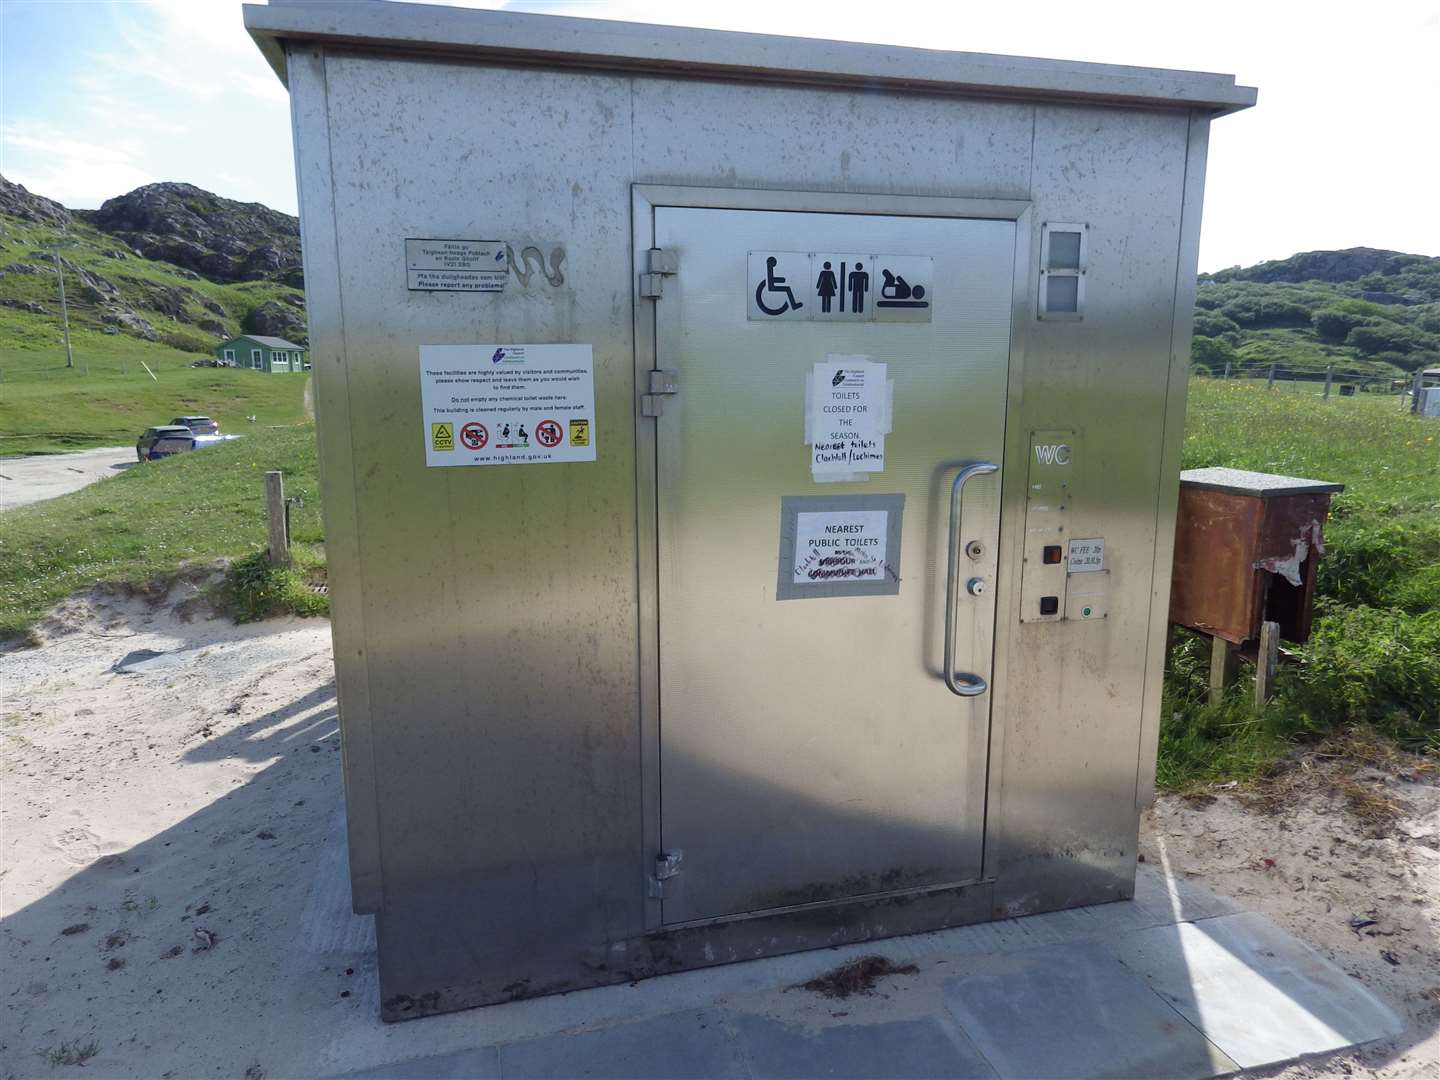 The portable unisex toilet cubicle moved from Gairloch beach to Achmelvich beach.